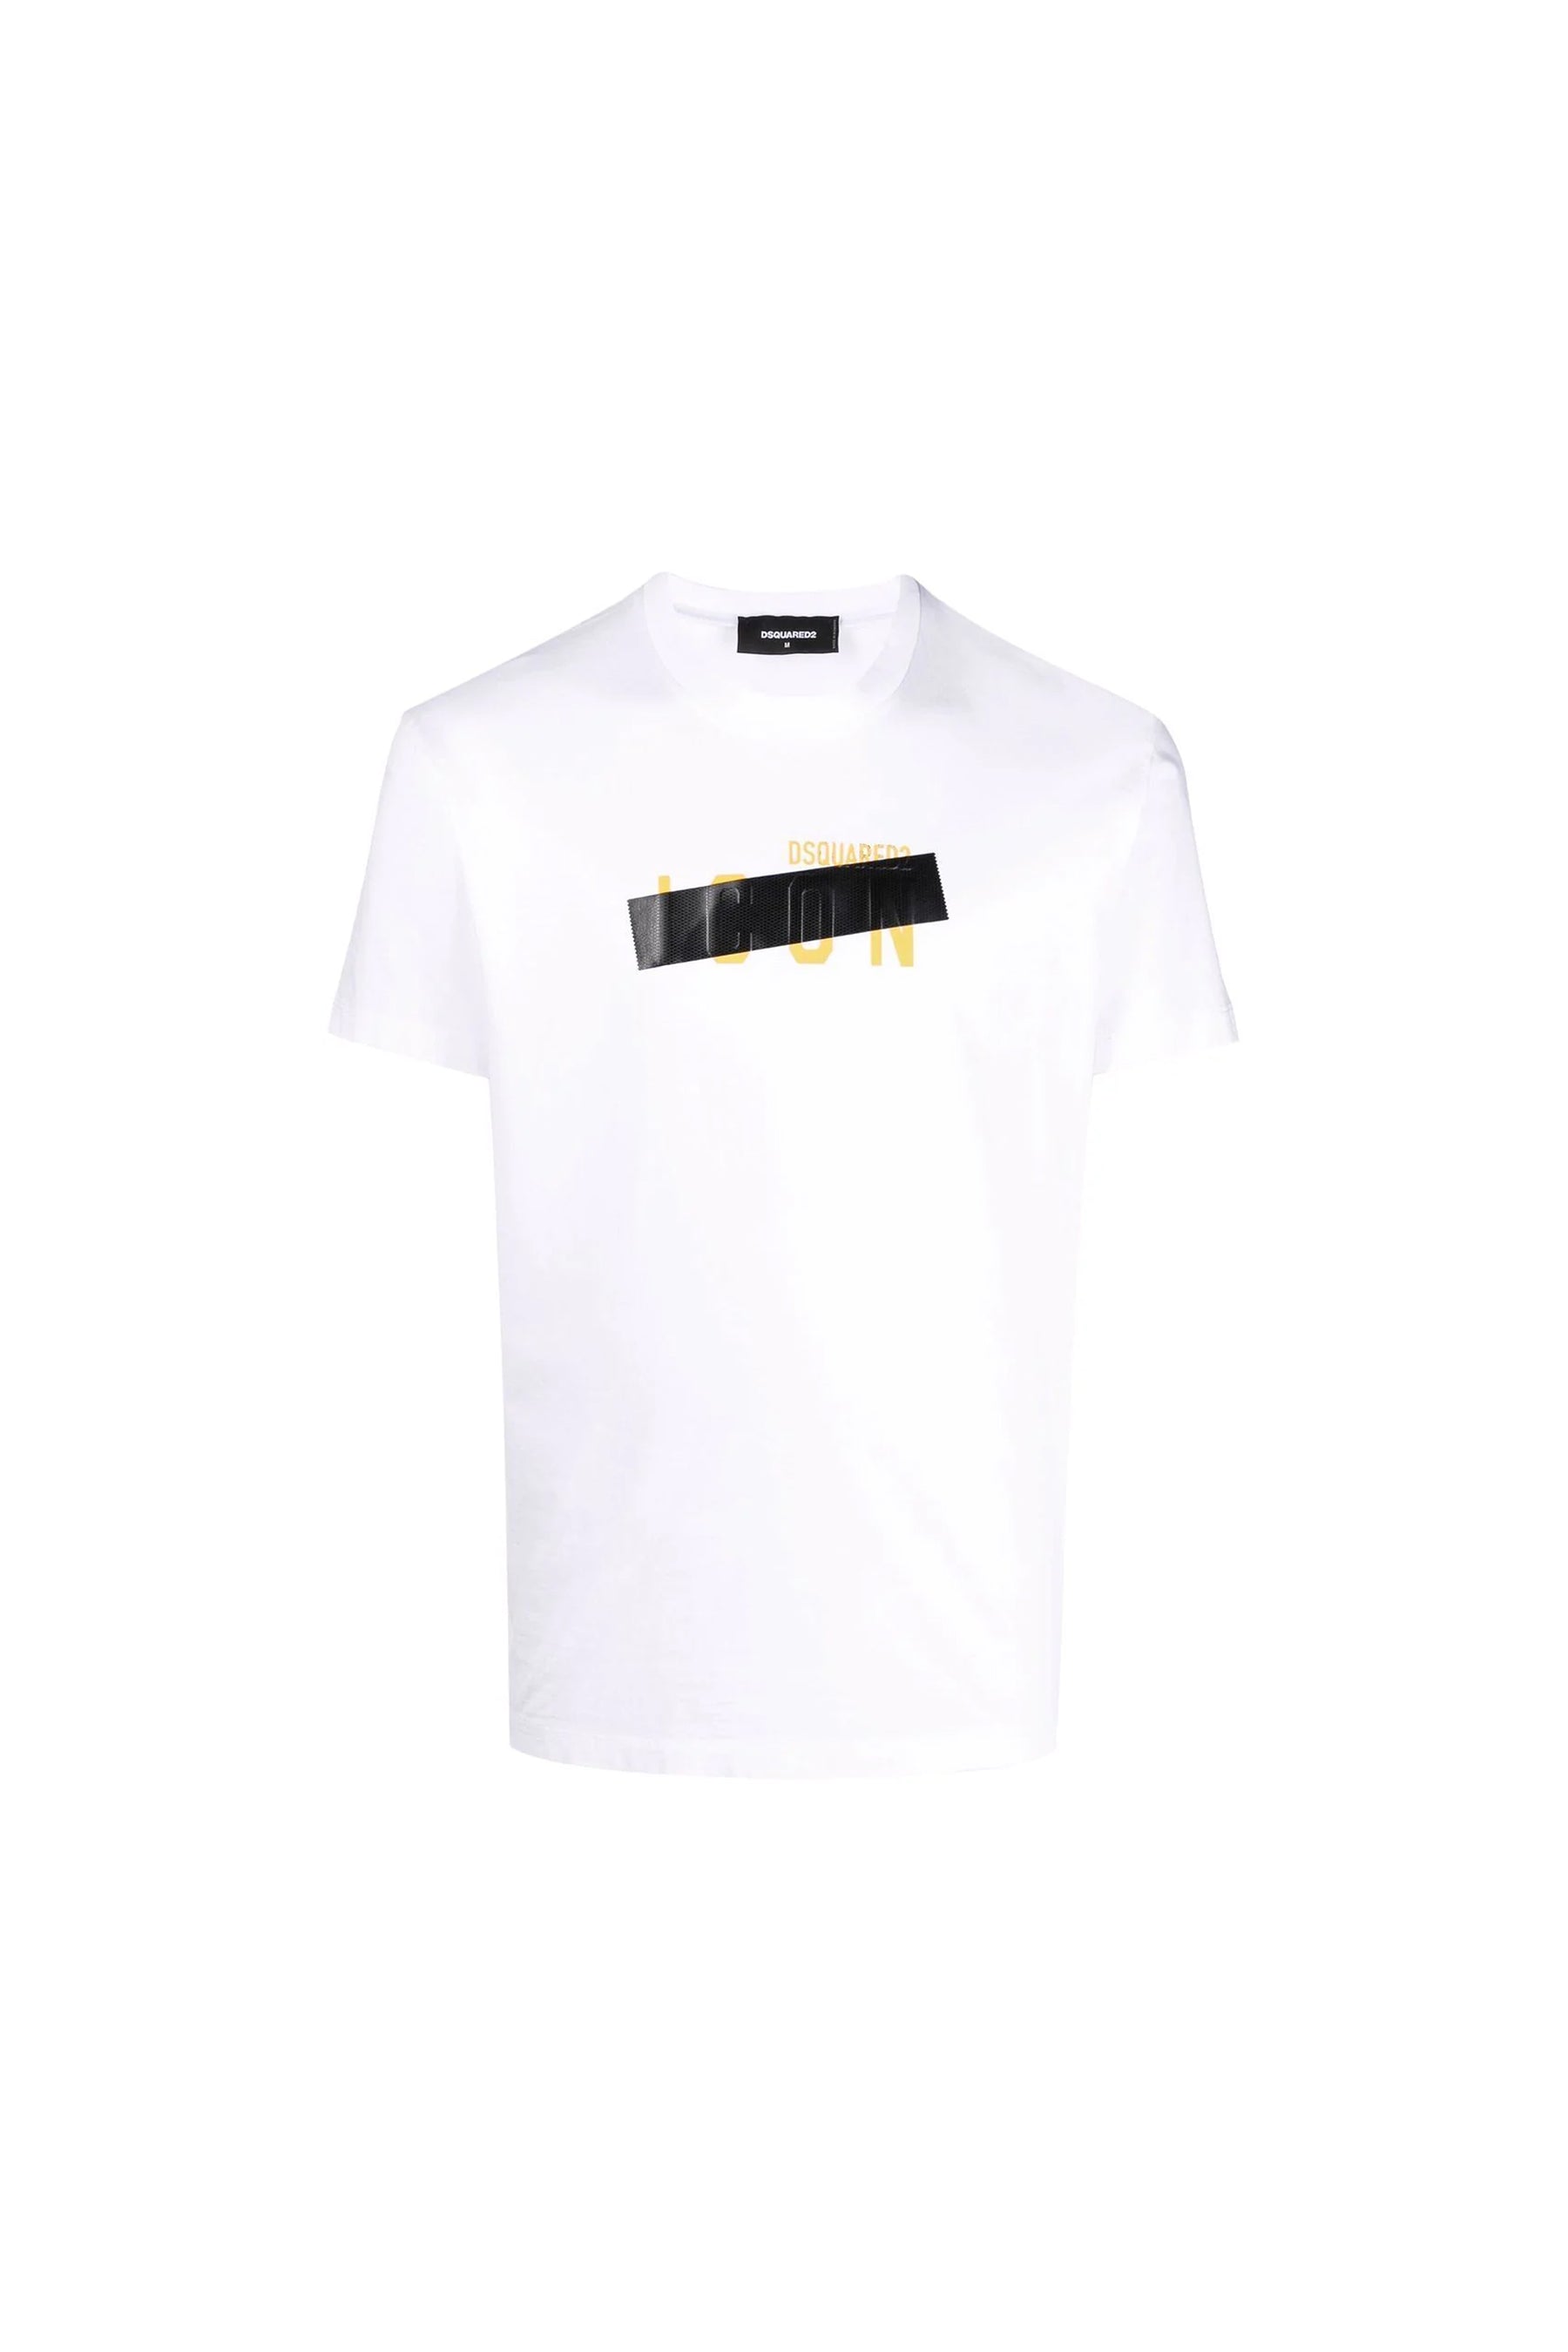 Dsquared2 tape detail Icon T-shirt